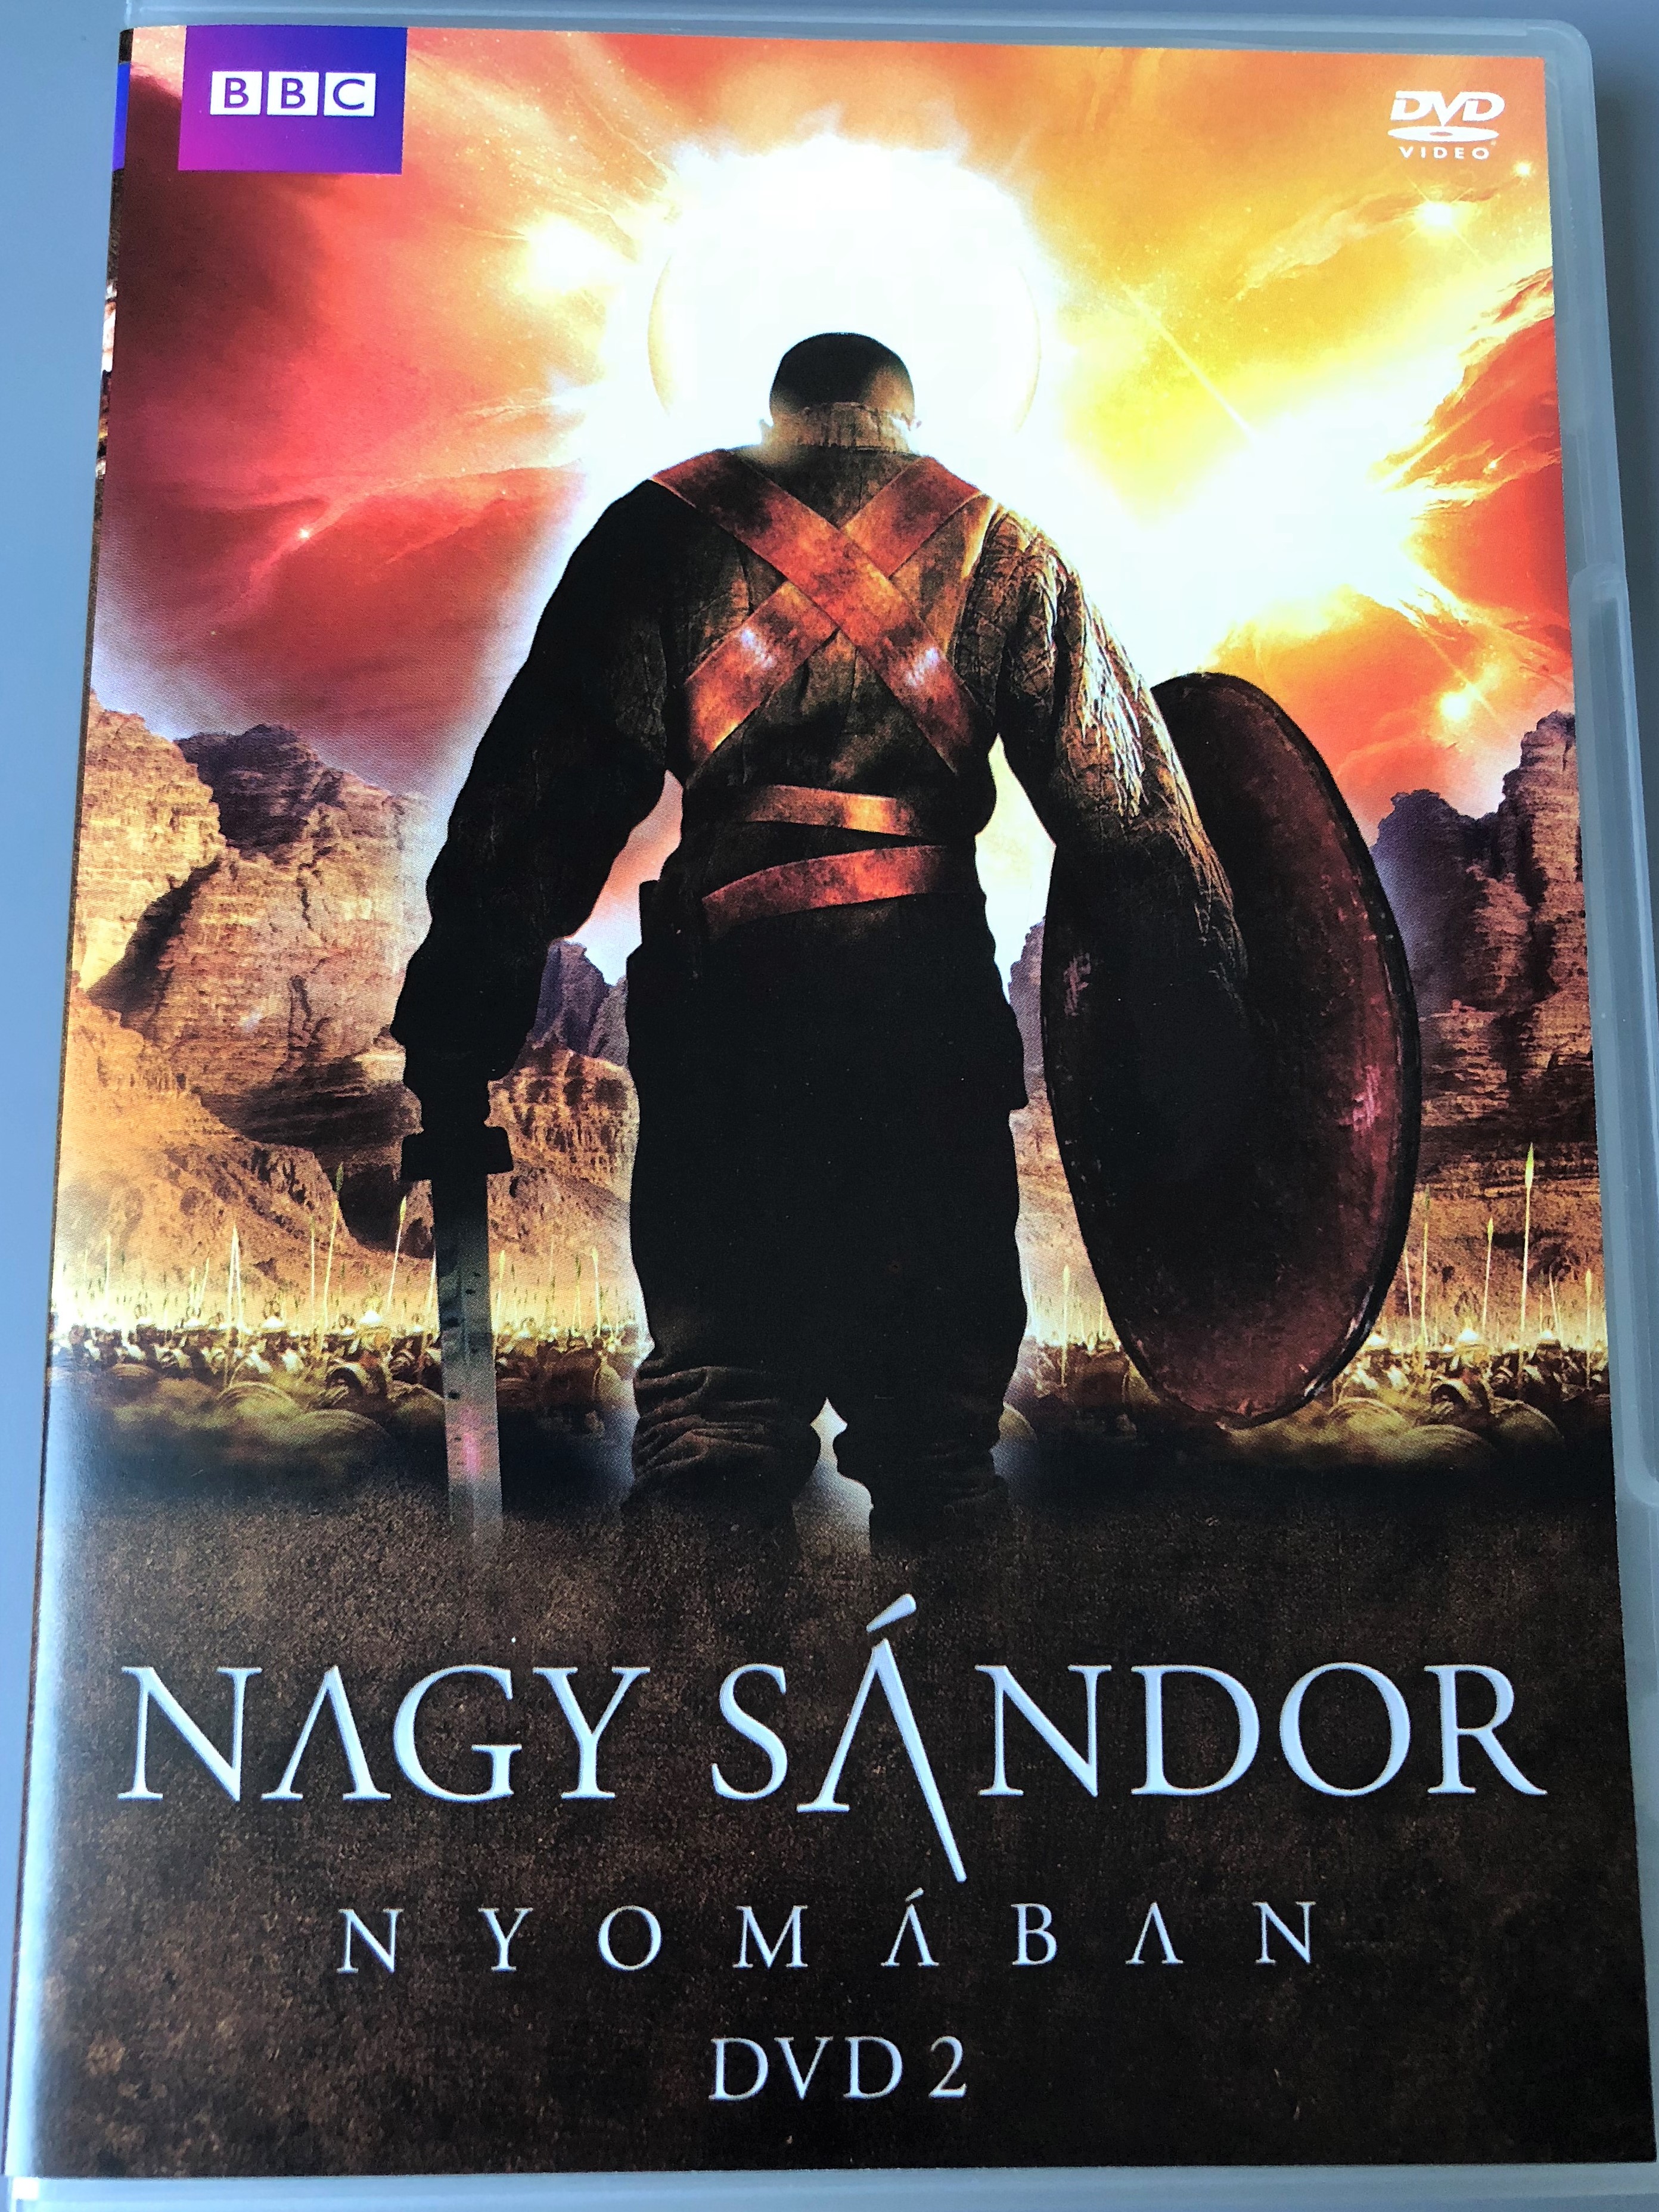 -nagy-s-ndor-nyom-ban-2.-dvd-1997-in-the-footsteps-of-alexander-the-great-2.-bbc-documentary-directed-by-david-wallace-written-presented-by-michael-wood-disc-2-episodes-3-4-1-.jpg